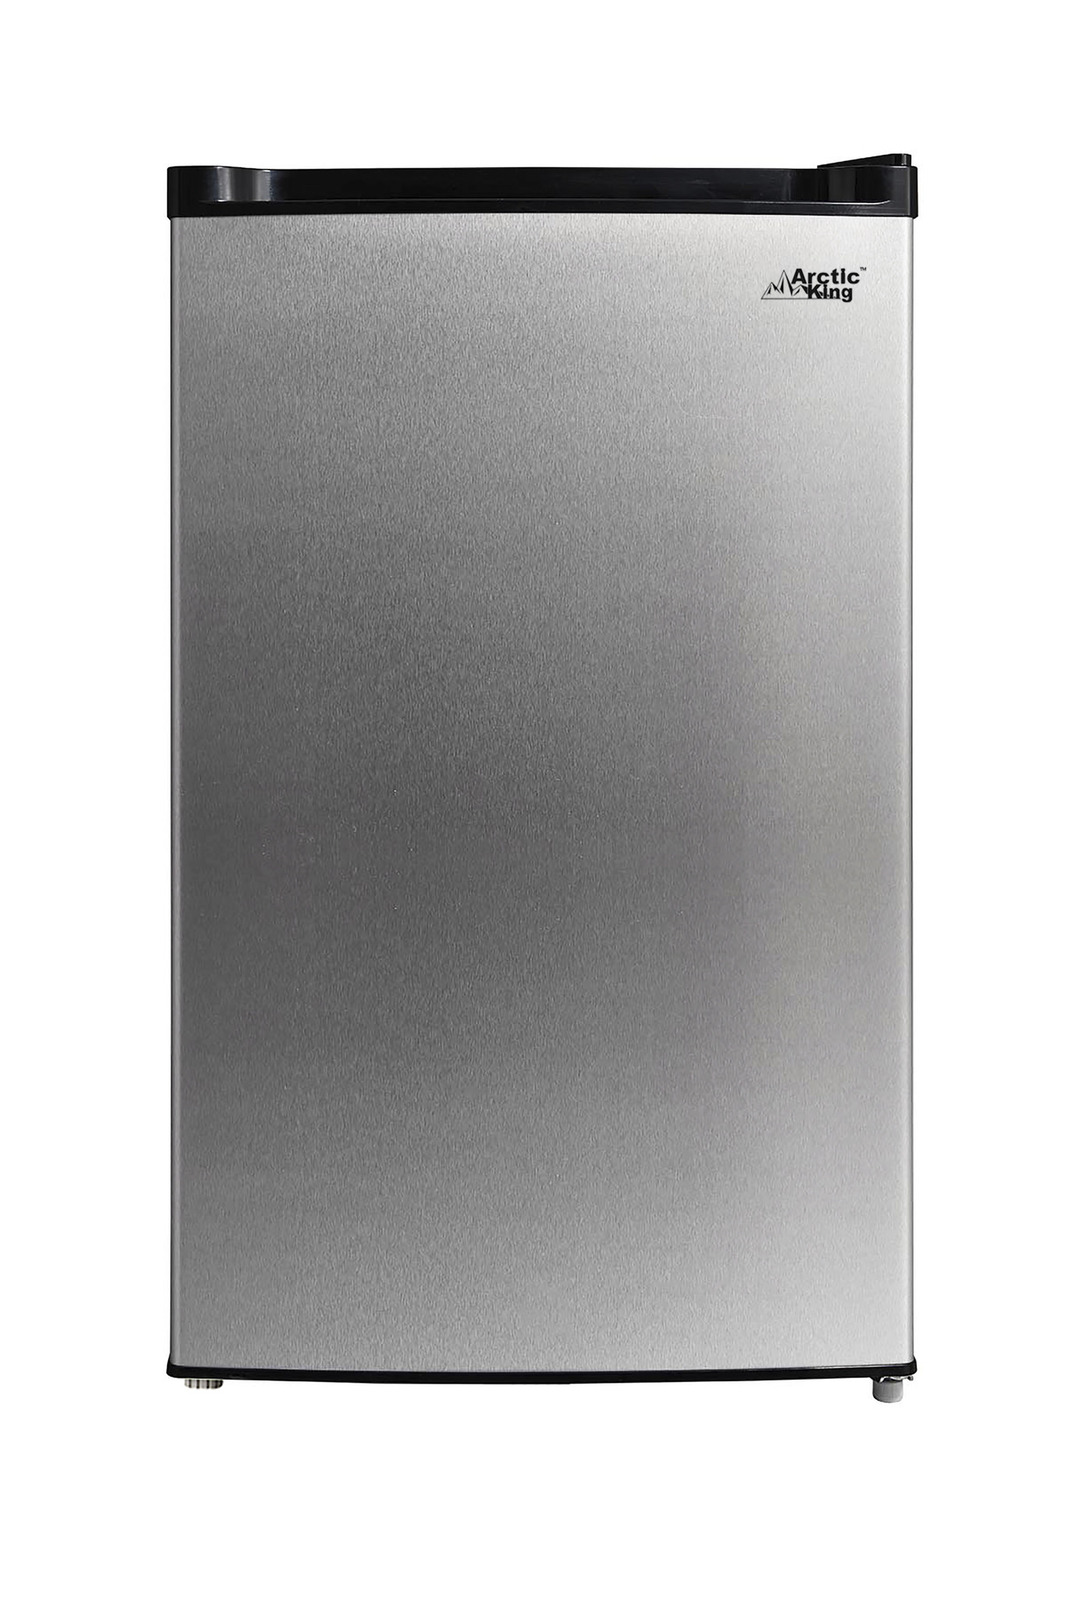 3.0 Cu ft Mini Upright Freezer Arctic King, E-star, Stainless Steel or White NEW